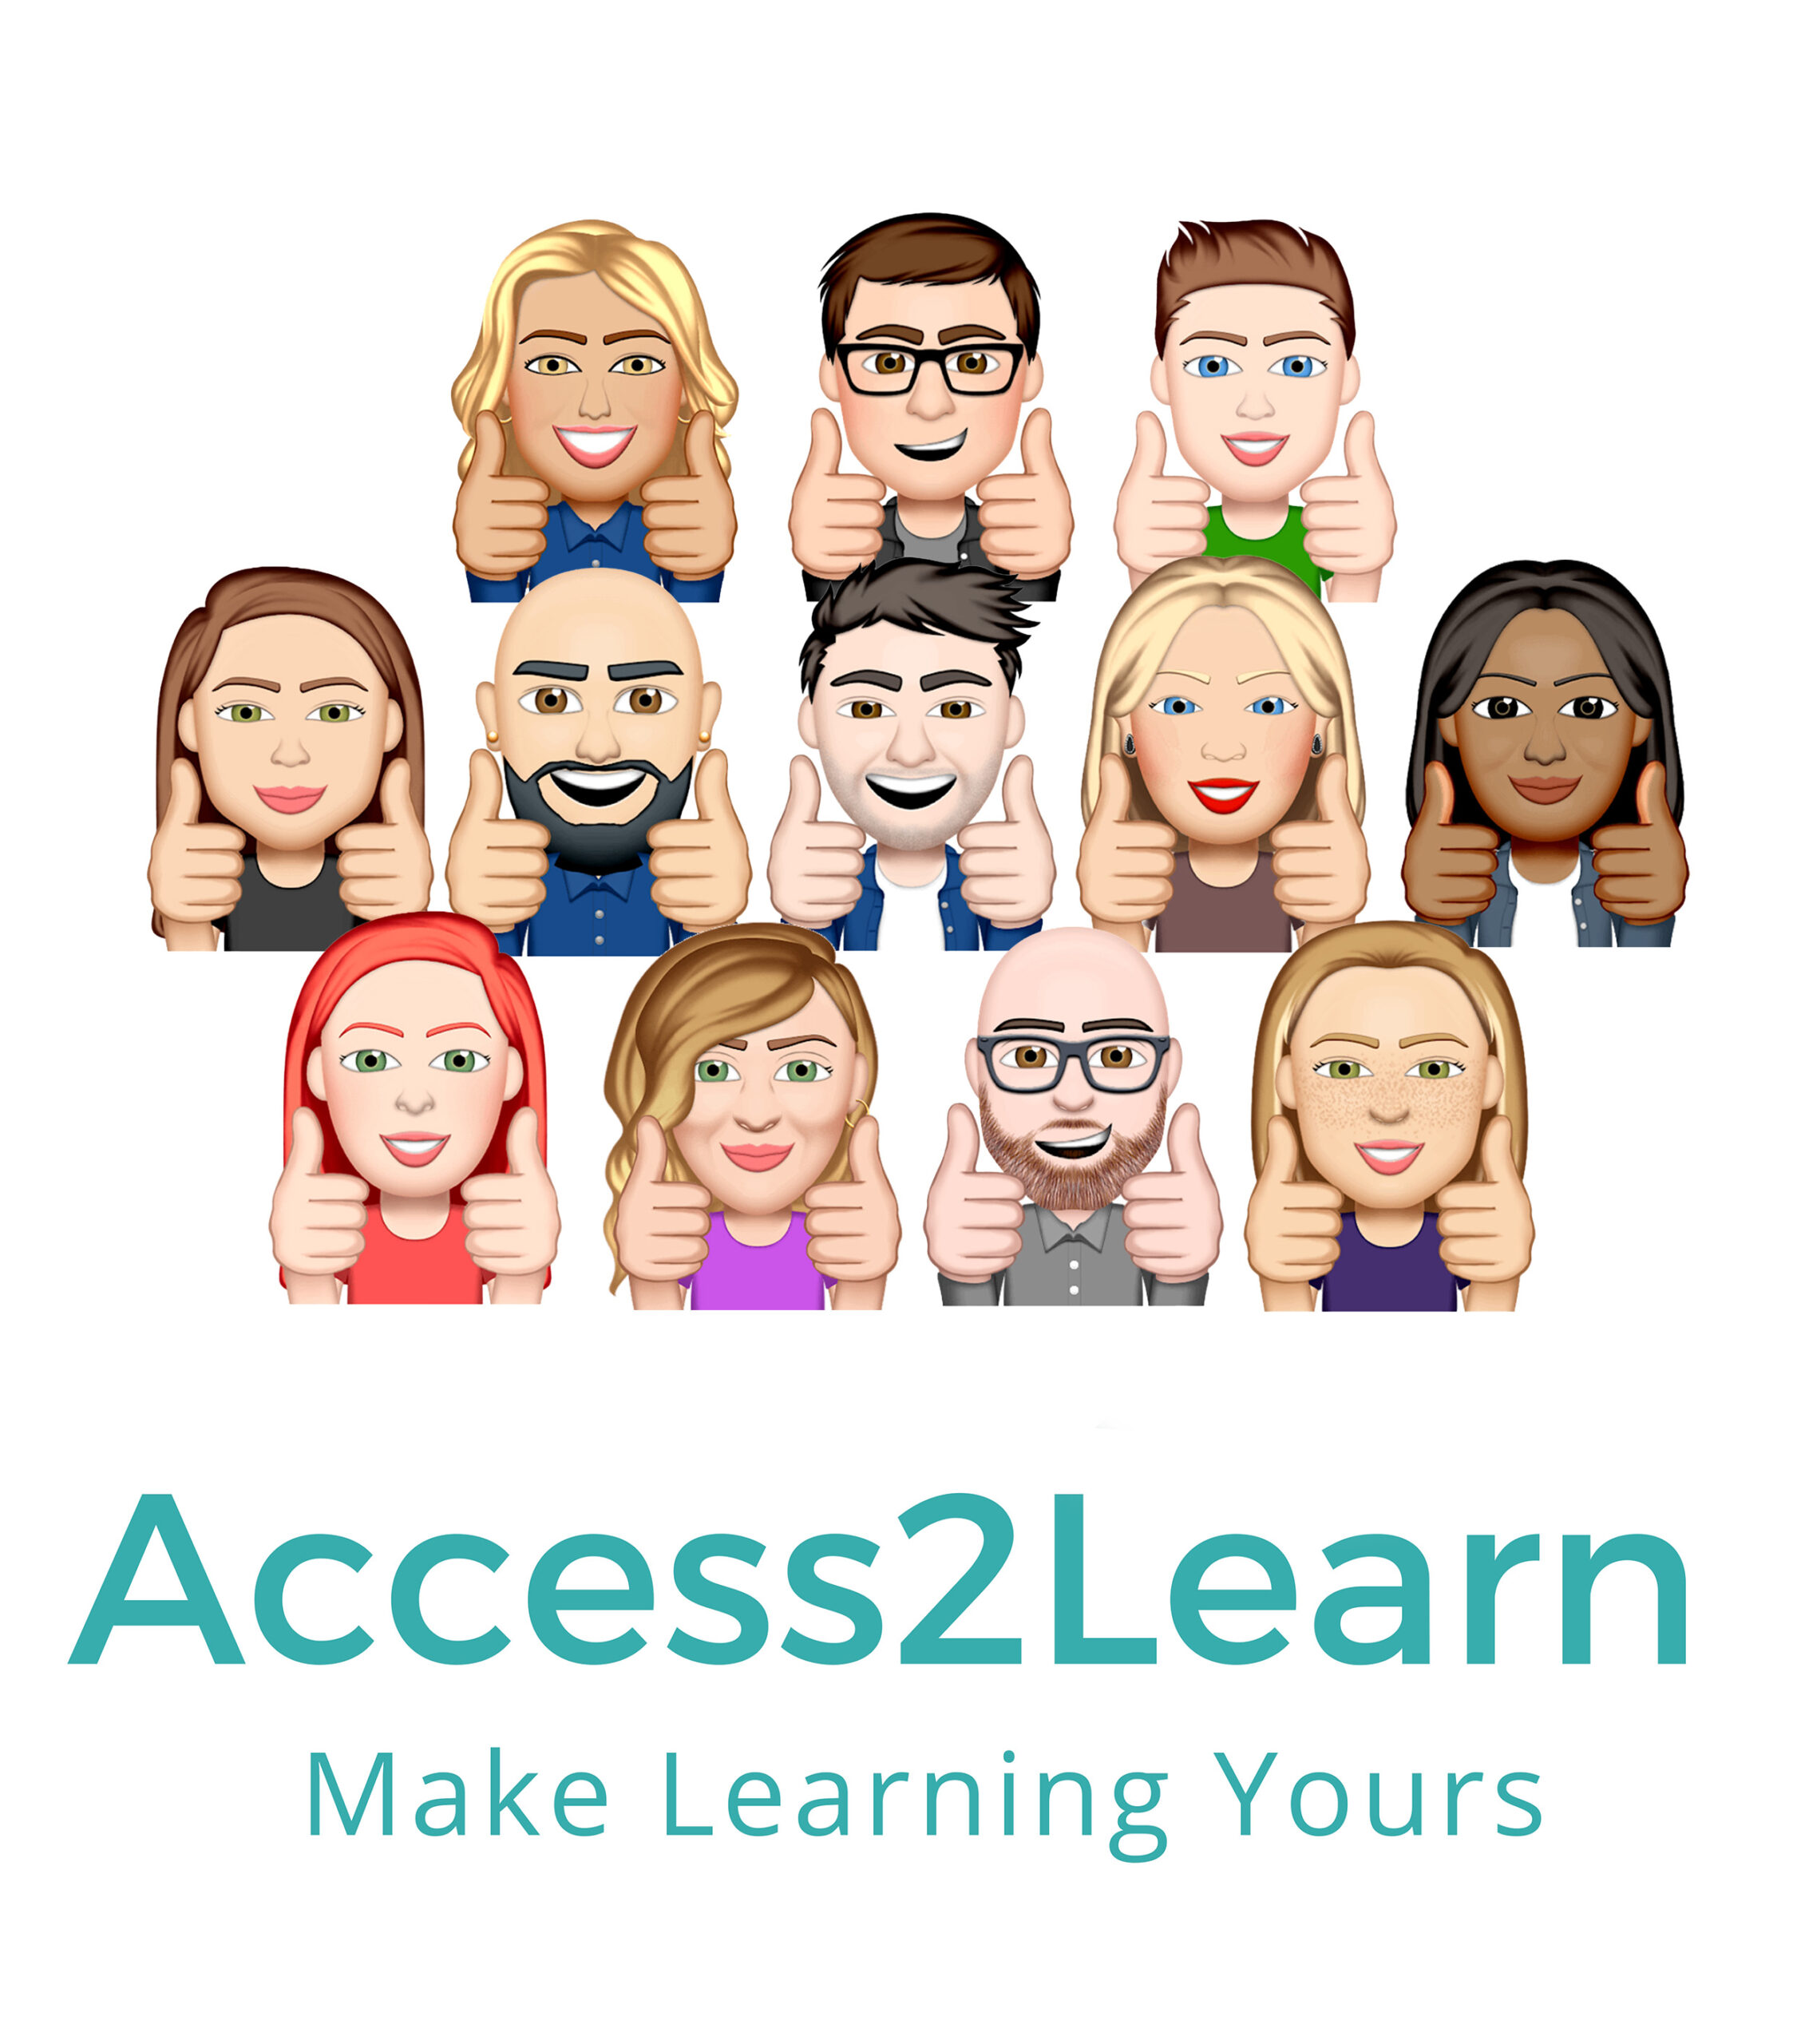 Avatars of the staff members of Access2Learn, all giving a thumbs up and looking happy